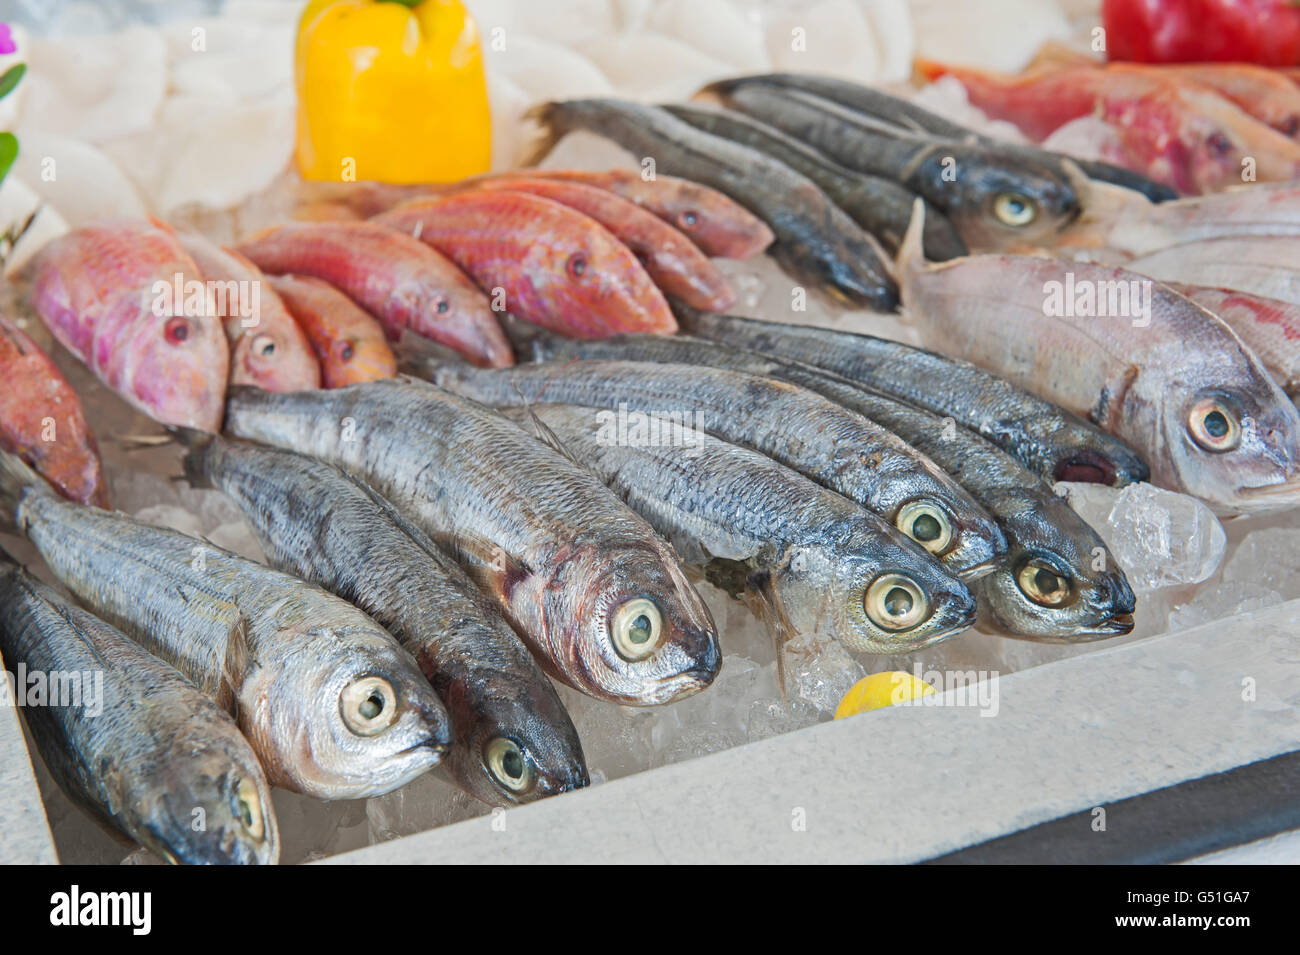 Collection of fresh mullet fish on display at seafood restaurant buffet Stock Photo